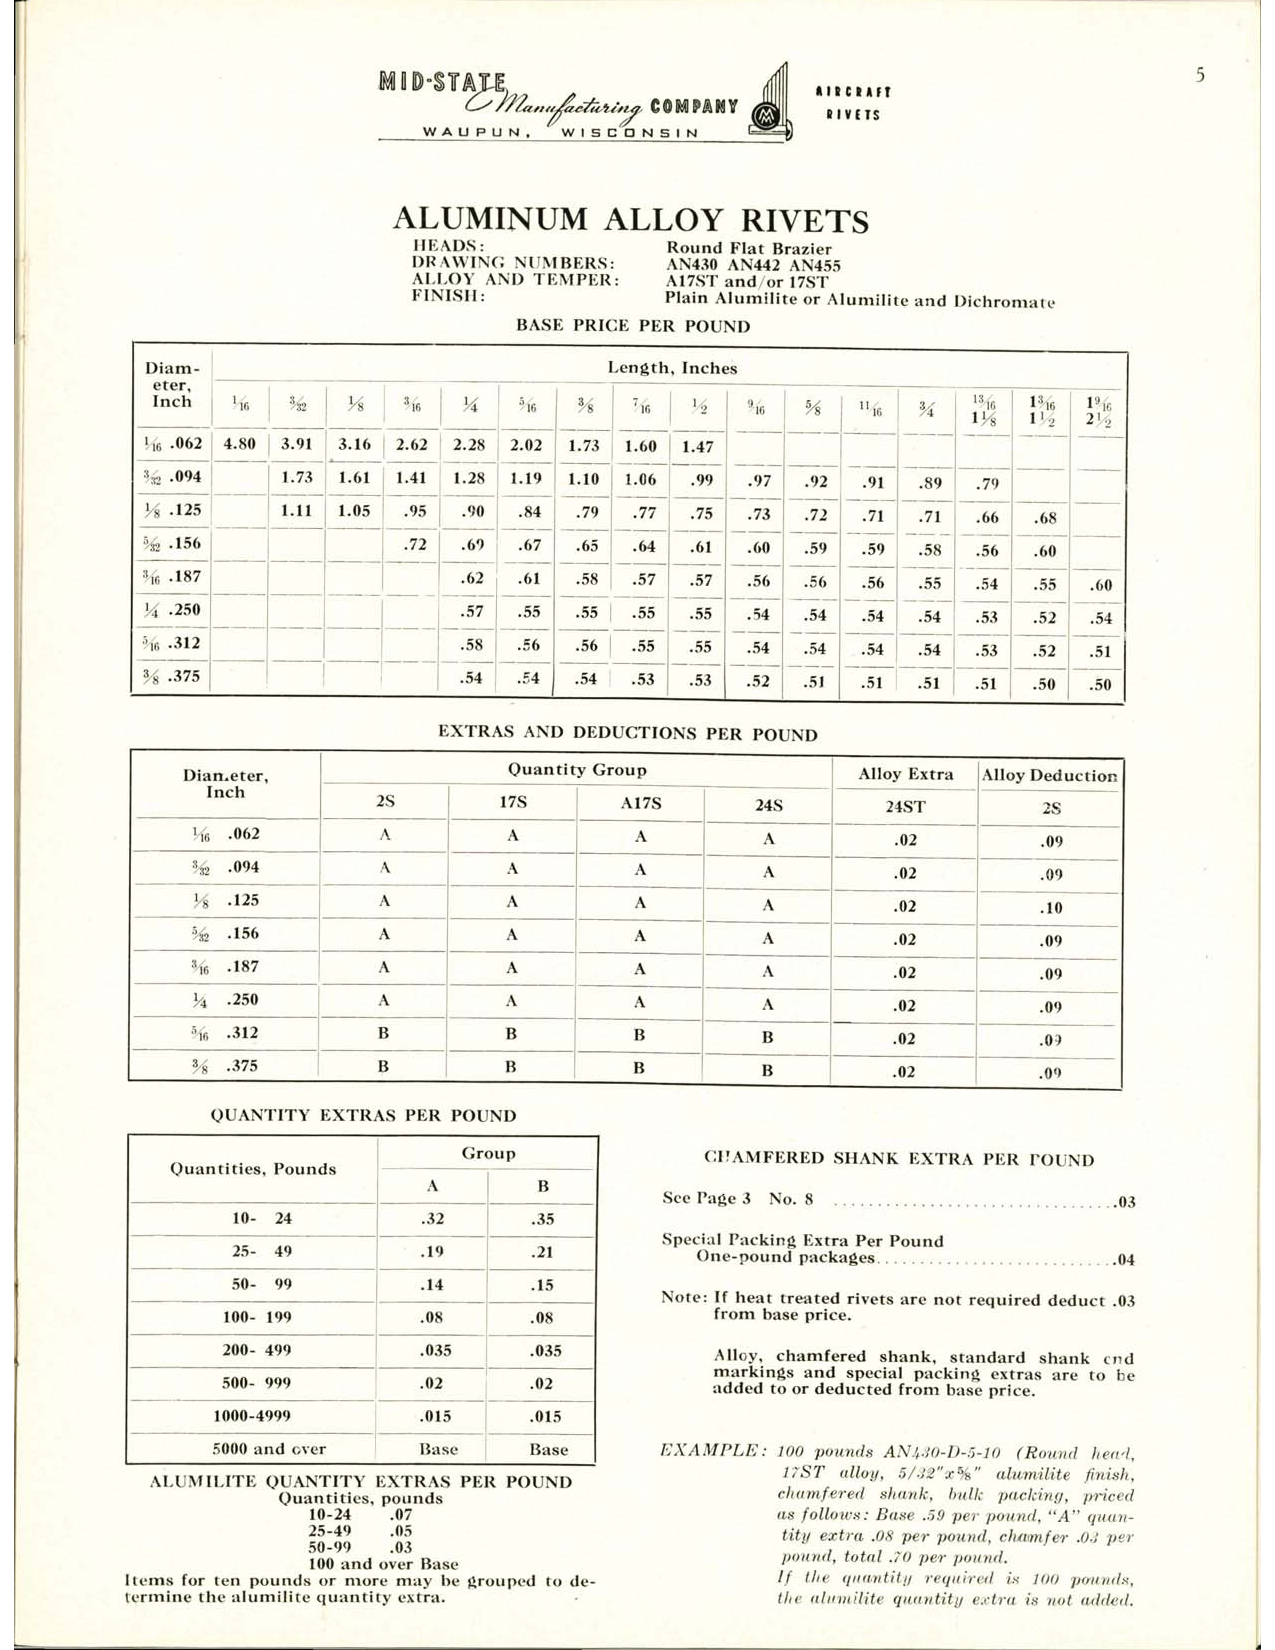 Sample page 5 from AirCorps Library document: Aircraft Rivets - Mid-State Manufacturing Co